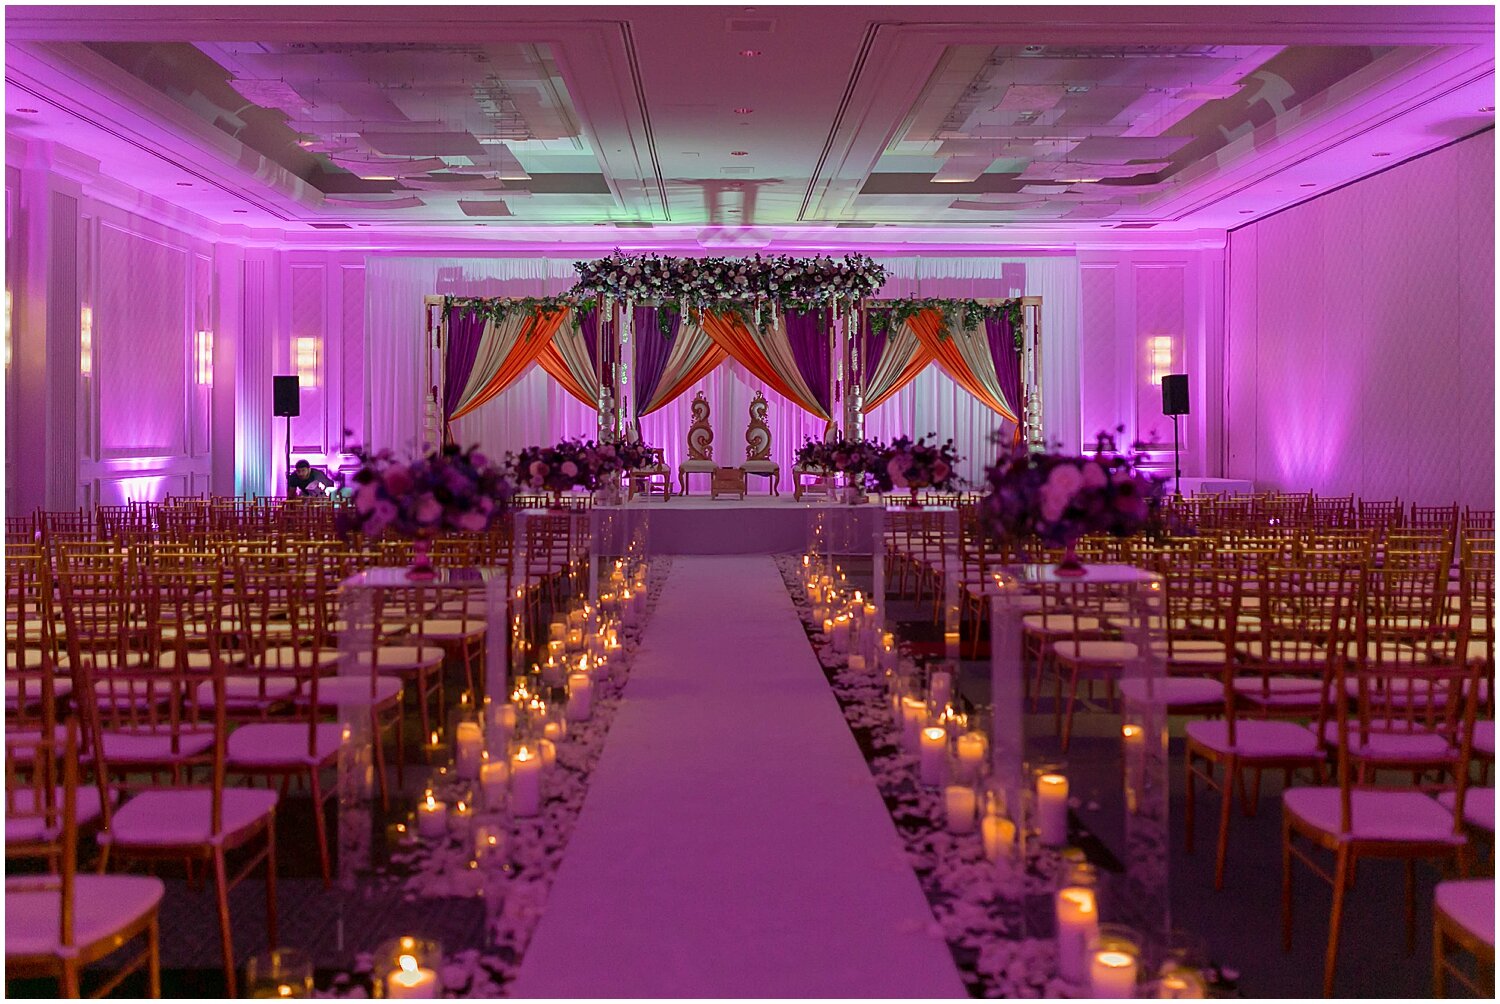  Candlelights in the aisle for wedding ceremony and purple lighting 